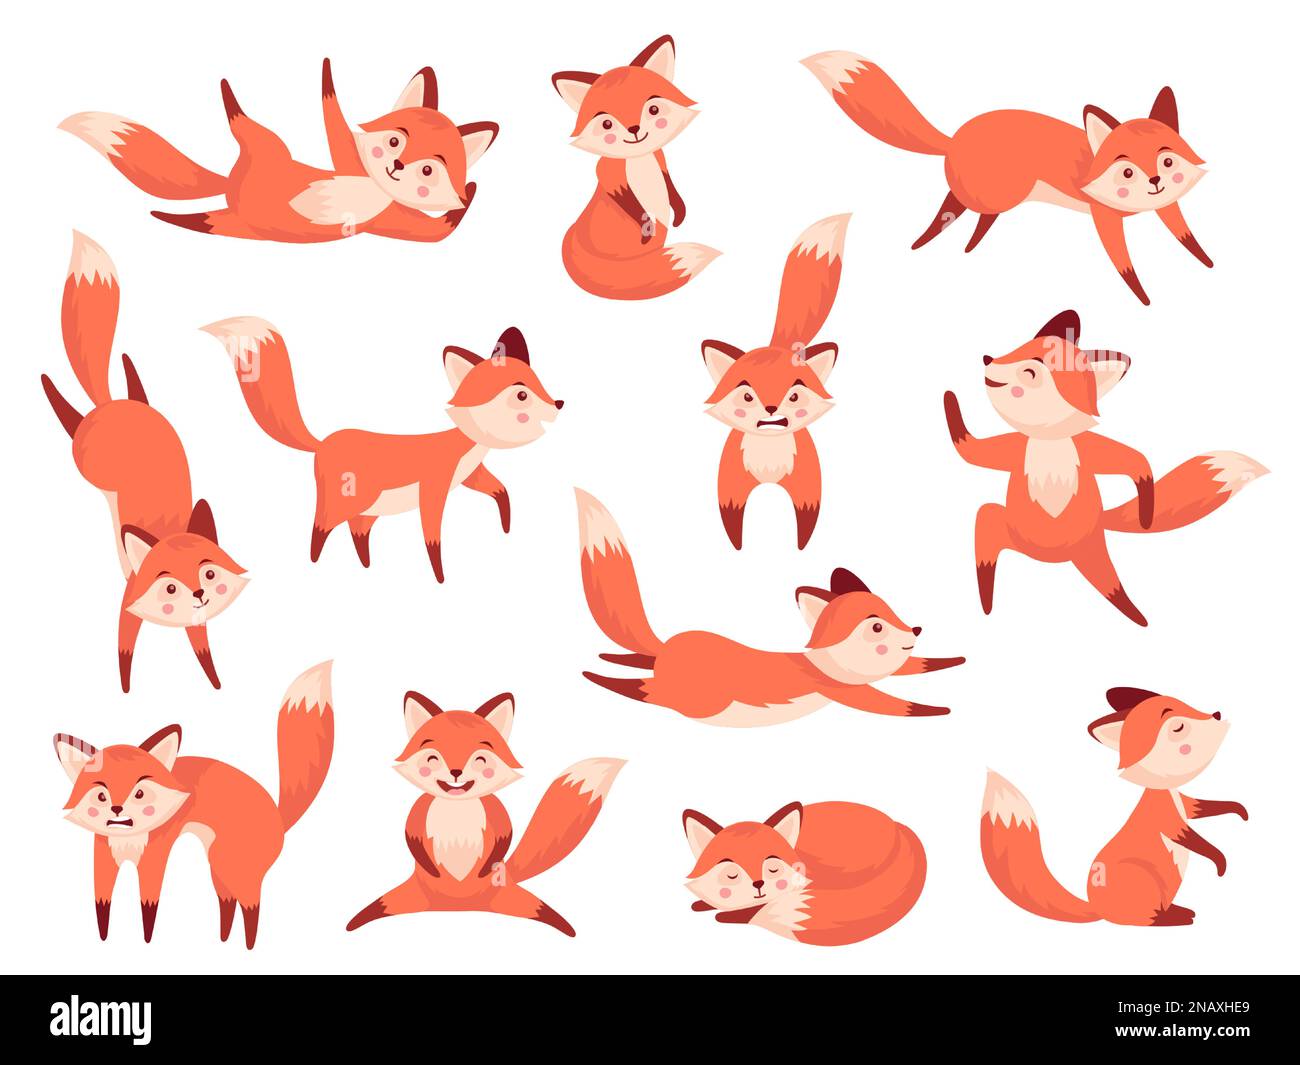 Fox character. Cute cartoon wildlife red mammals in different poses and actions, orange forest fur animals with funny emotions on faces. Vector flat Stock Vector